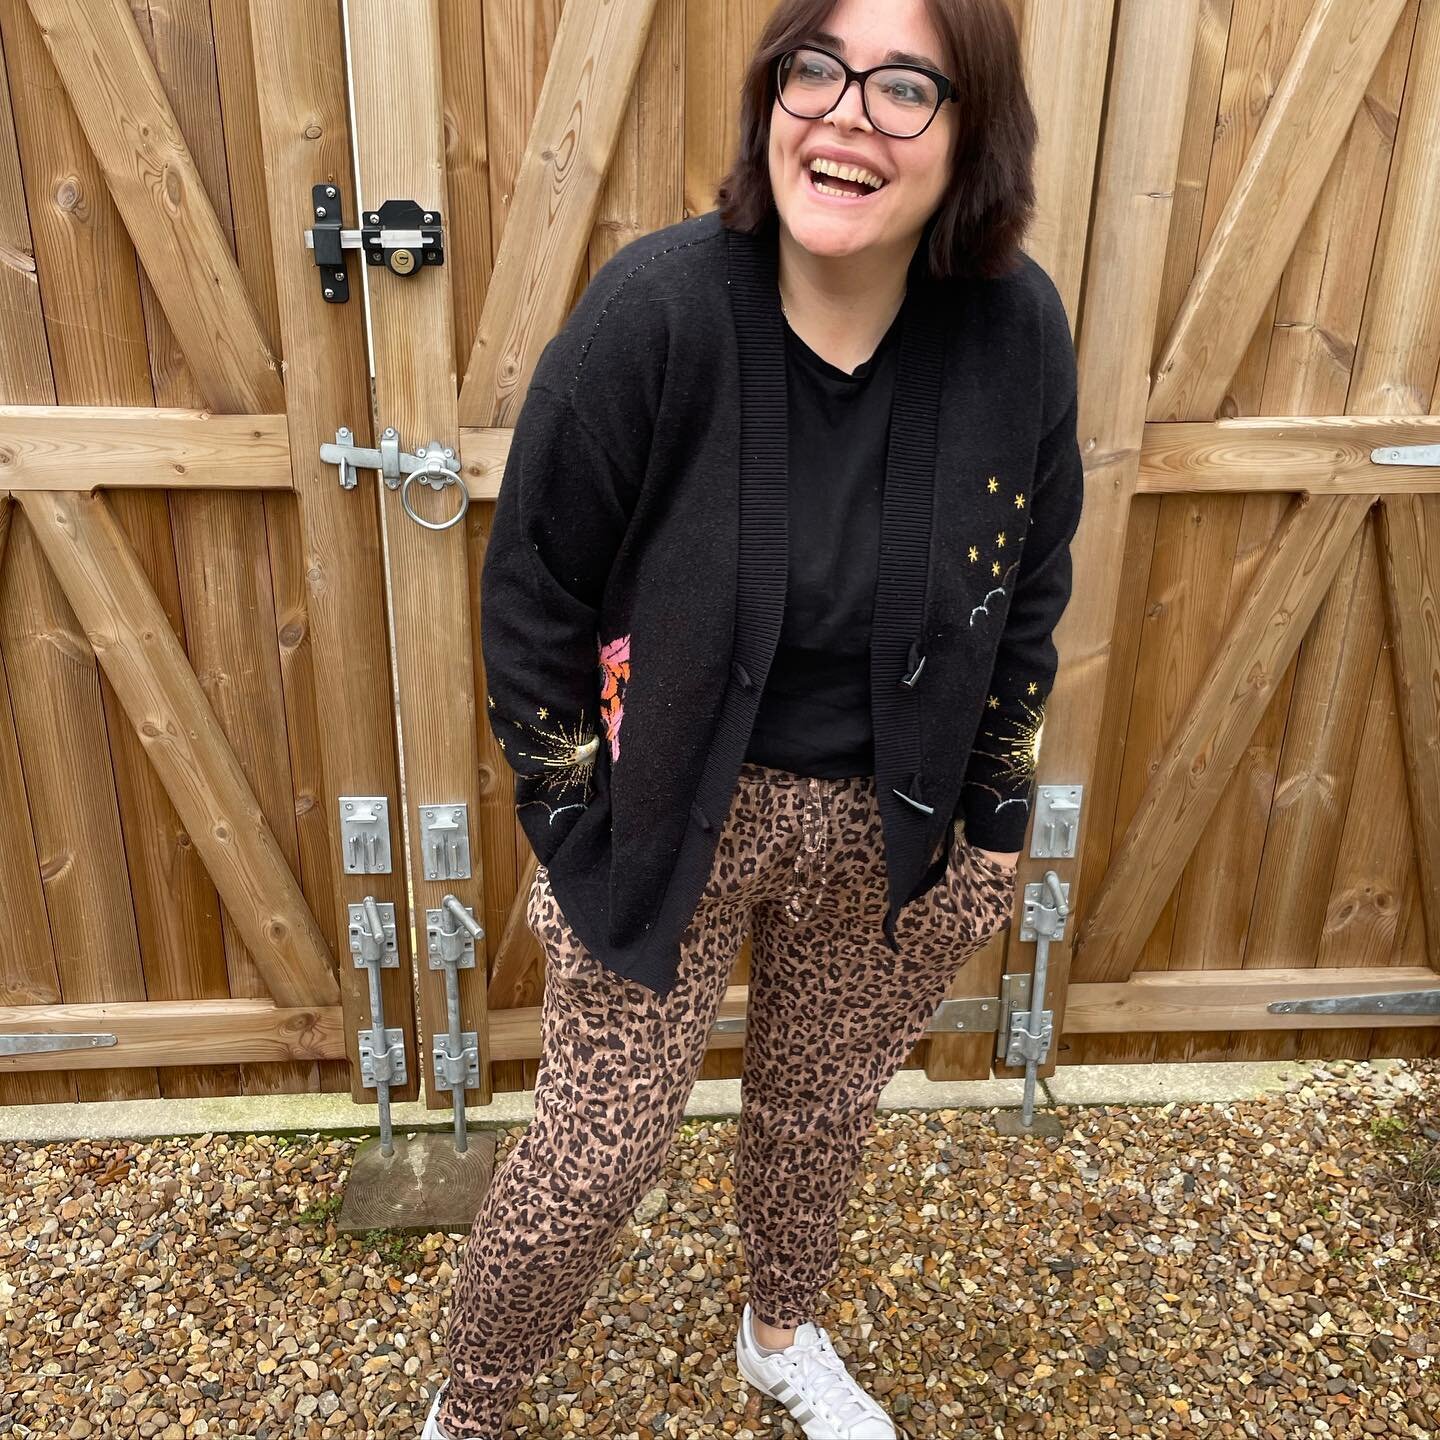 Back by my garden gates (oh the glamour) bringing you another outfit post today.

My obsession with leopard print and snazzy knitwear continues. Super comfy whilst feeling fairly together and most importantly very me (if that&rsquo;s makes sense). 

